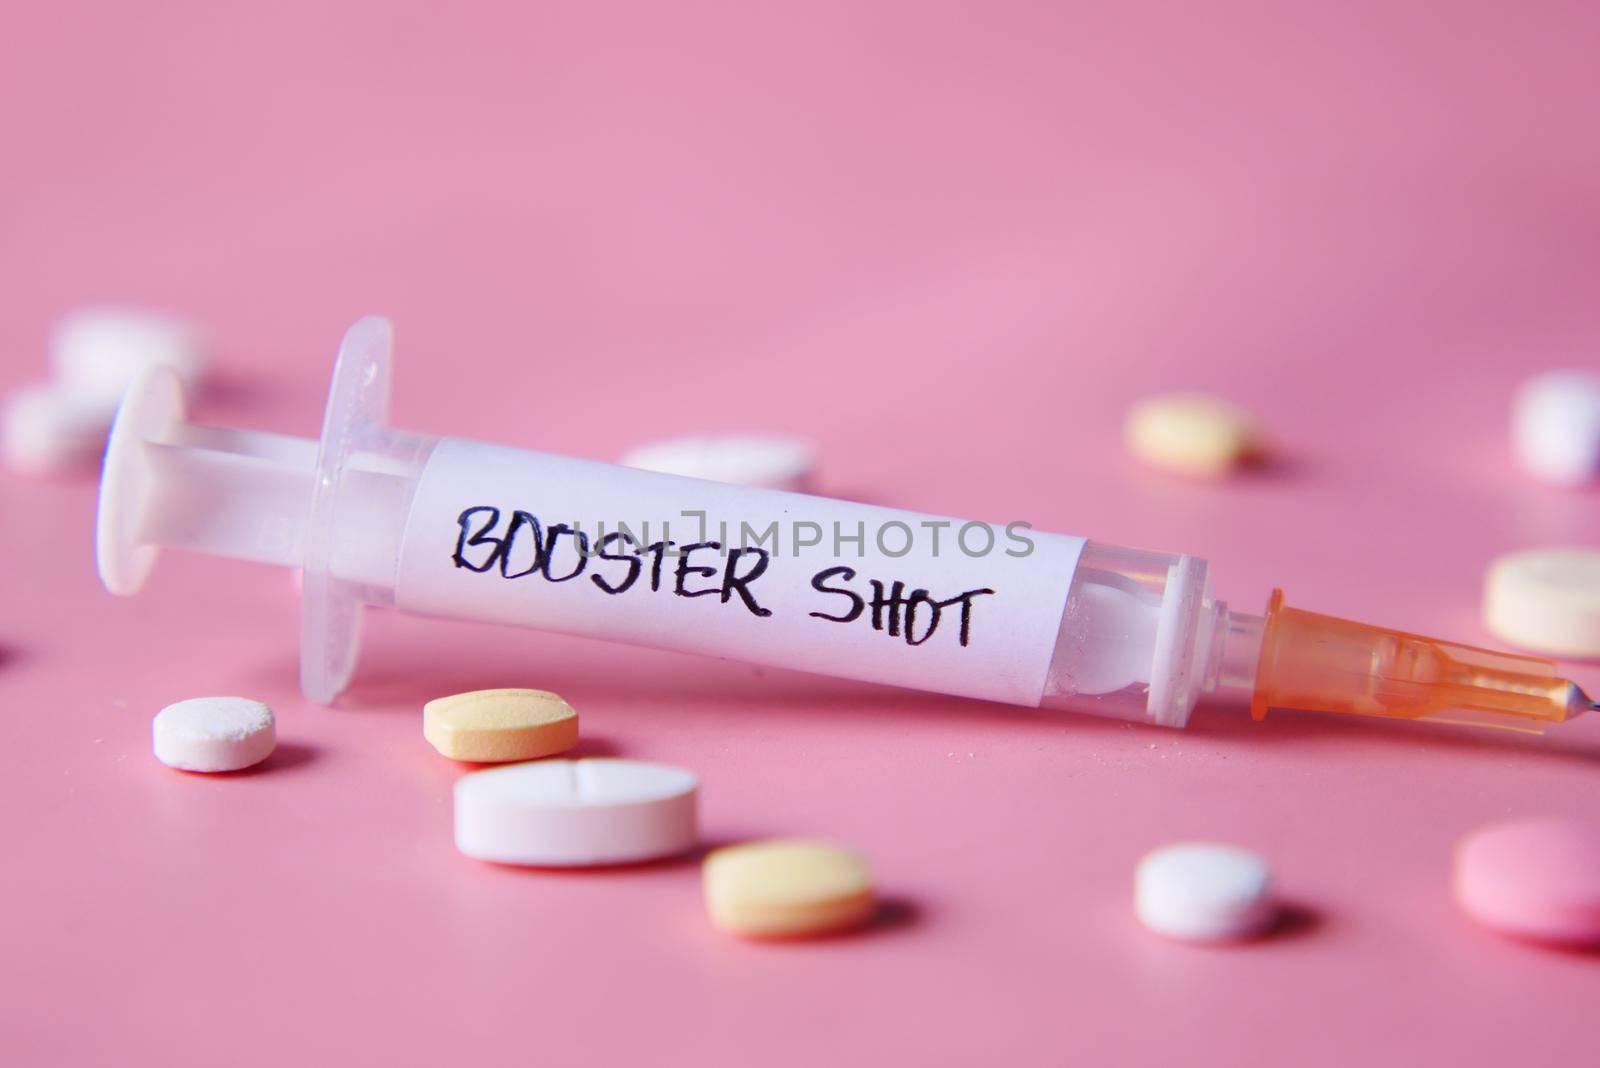 booster shot test on syringe and pills on pink background, close up,